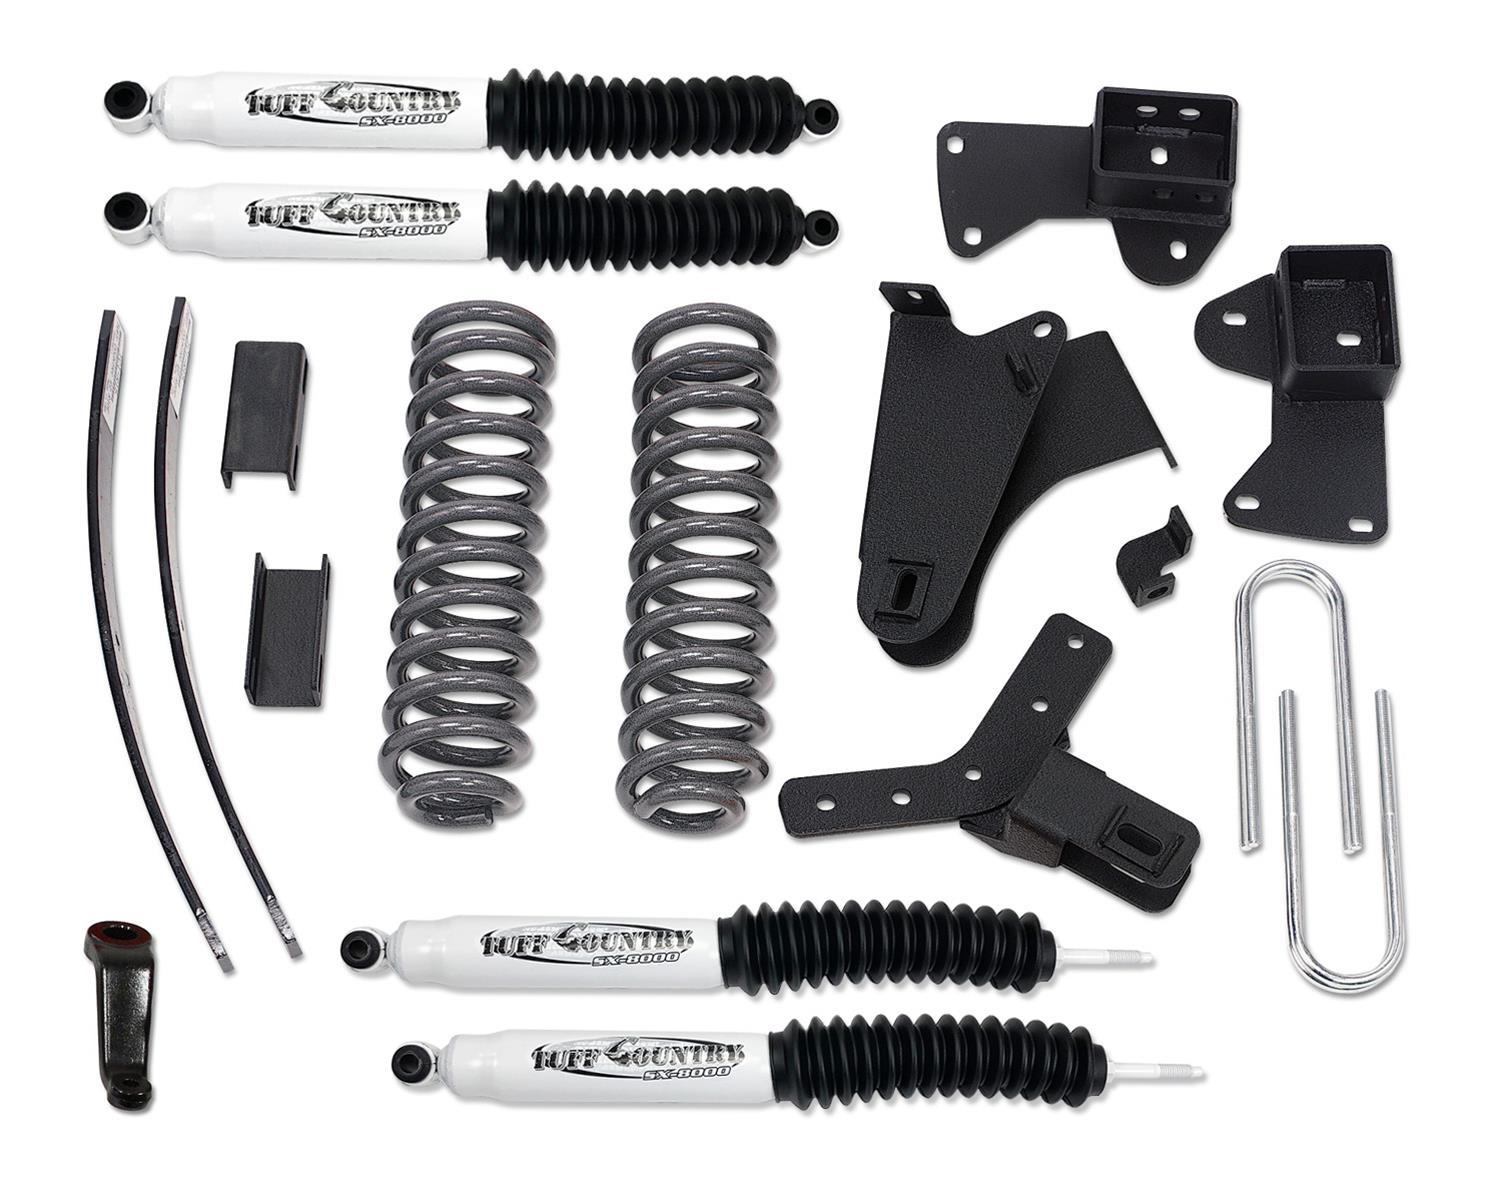 FORD Tuff Country 24860KN Tuff Country EZ-Ride Suspension Lift Kits Summit ...